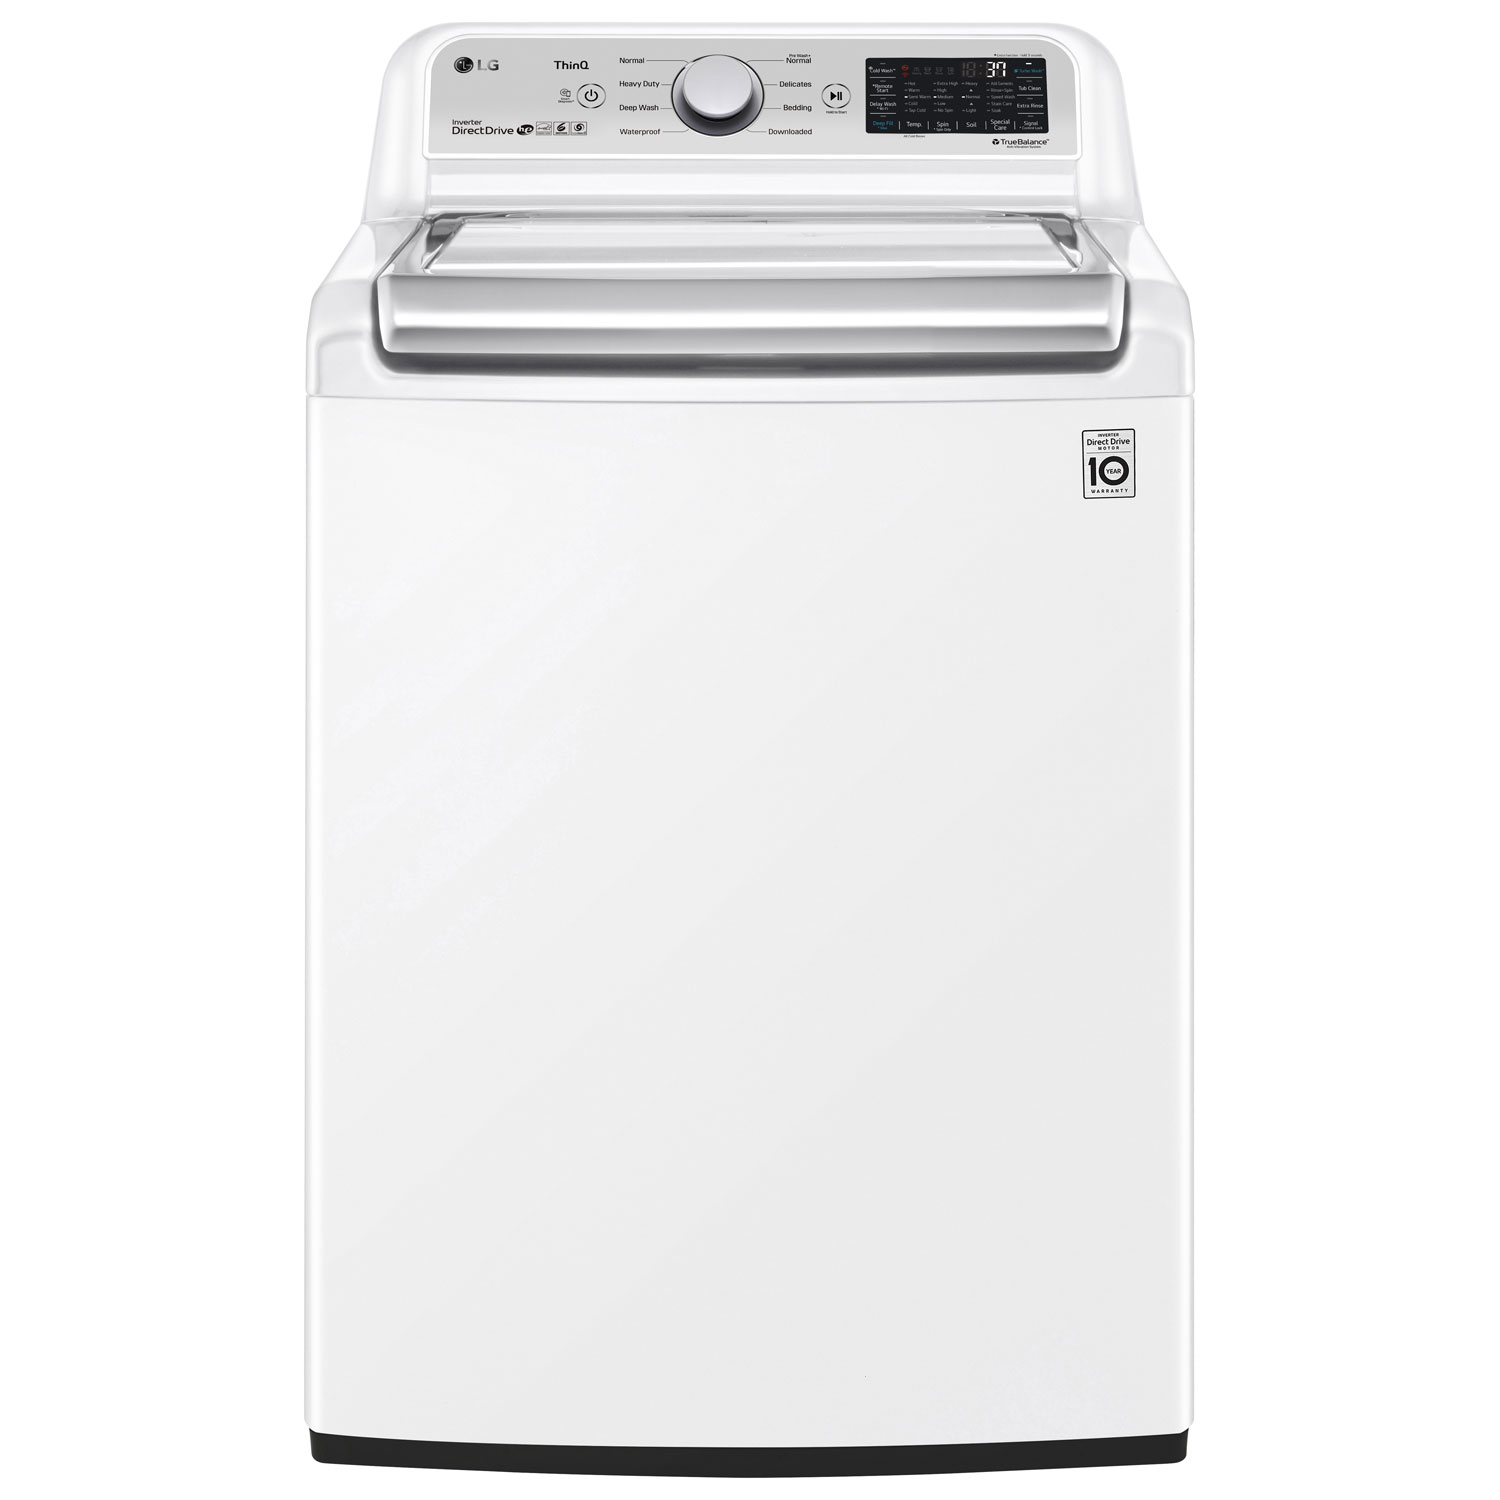 LG 5.6 Cu. Ft. High Efficiency Top Load Washer (WT7305CW) - White